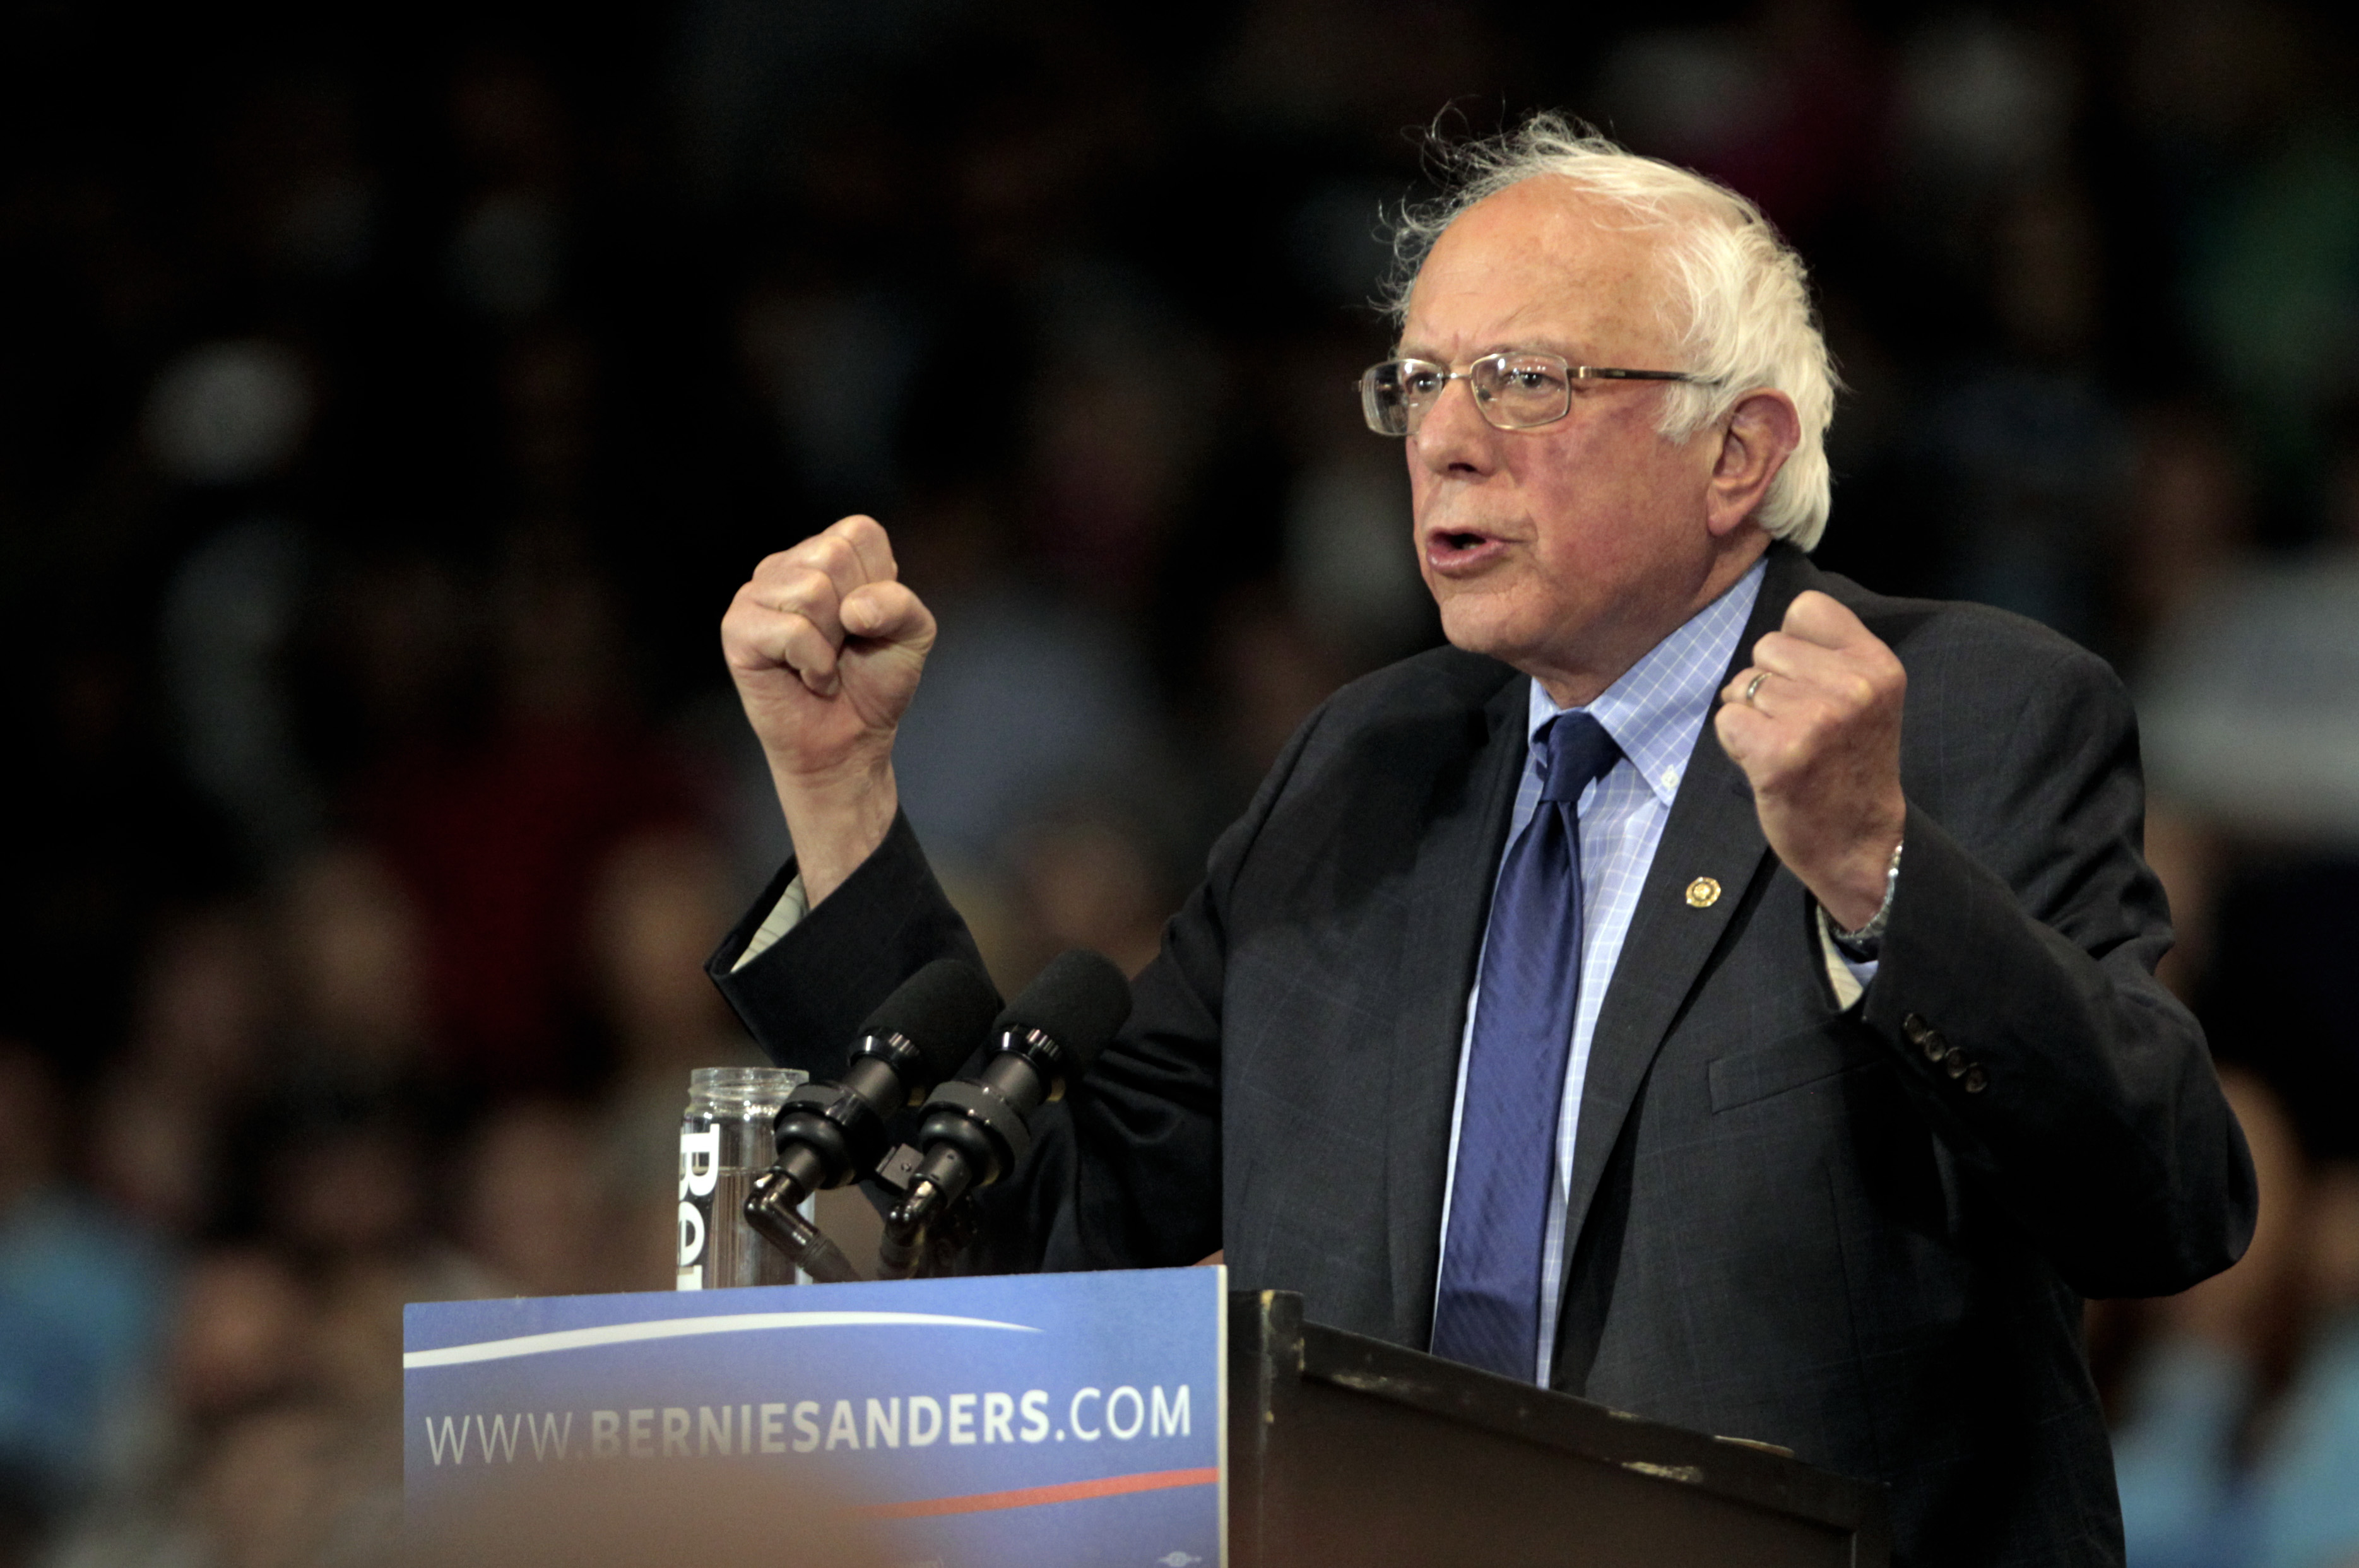 Democratic presidential candidate Bernie Sanders addresses the crowd during a campaign rally at the Big Sandy Superstore Arena, April 26, 2016 in Huntington, West Virginia. Sanders is preparing for West Virginia's May 10th primary. 